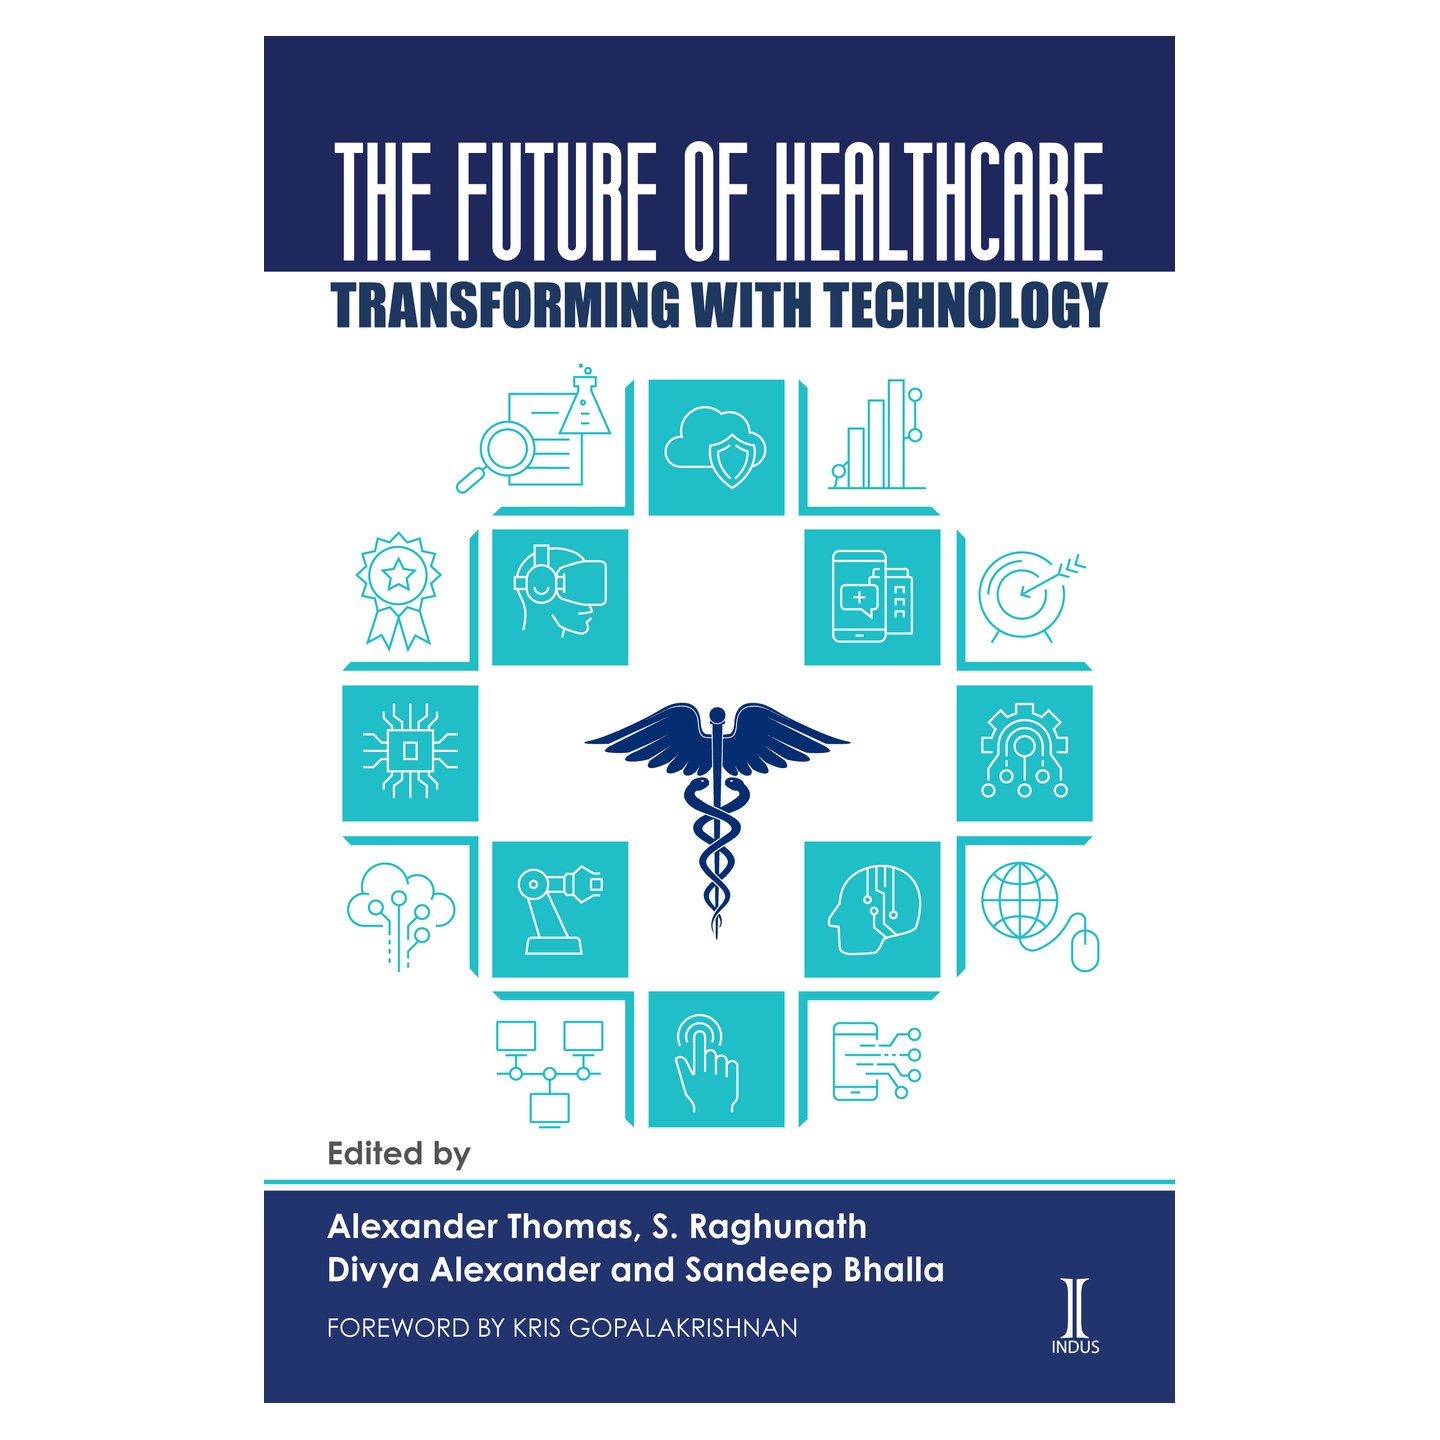 The Future of Healthcare: Transforming with Technology